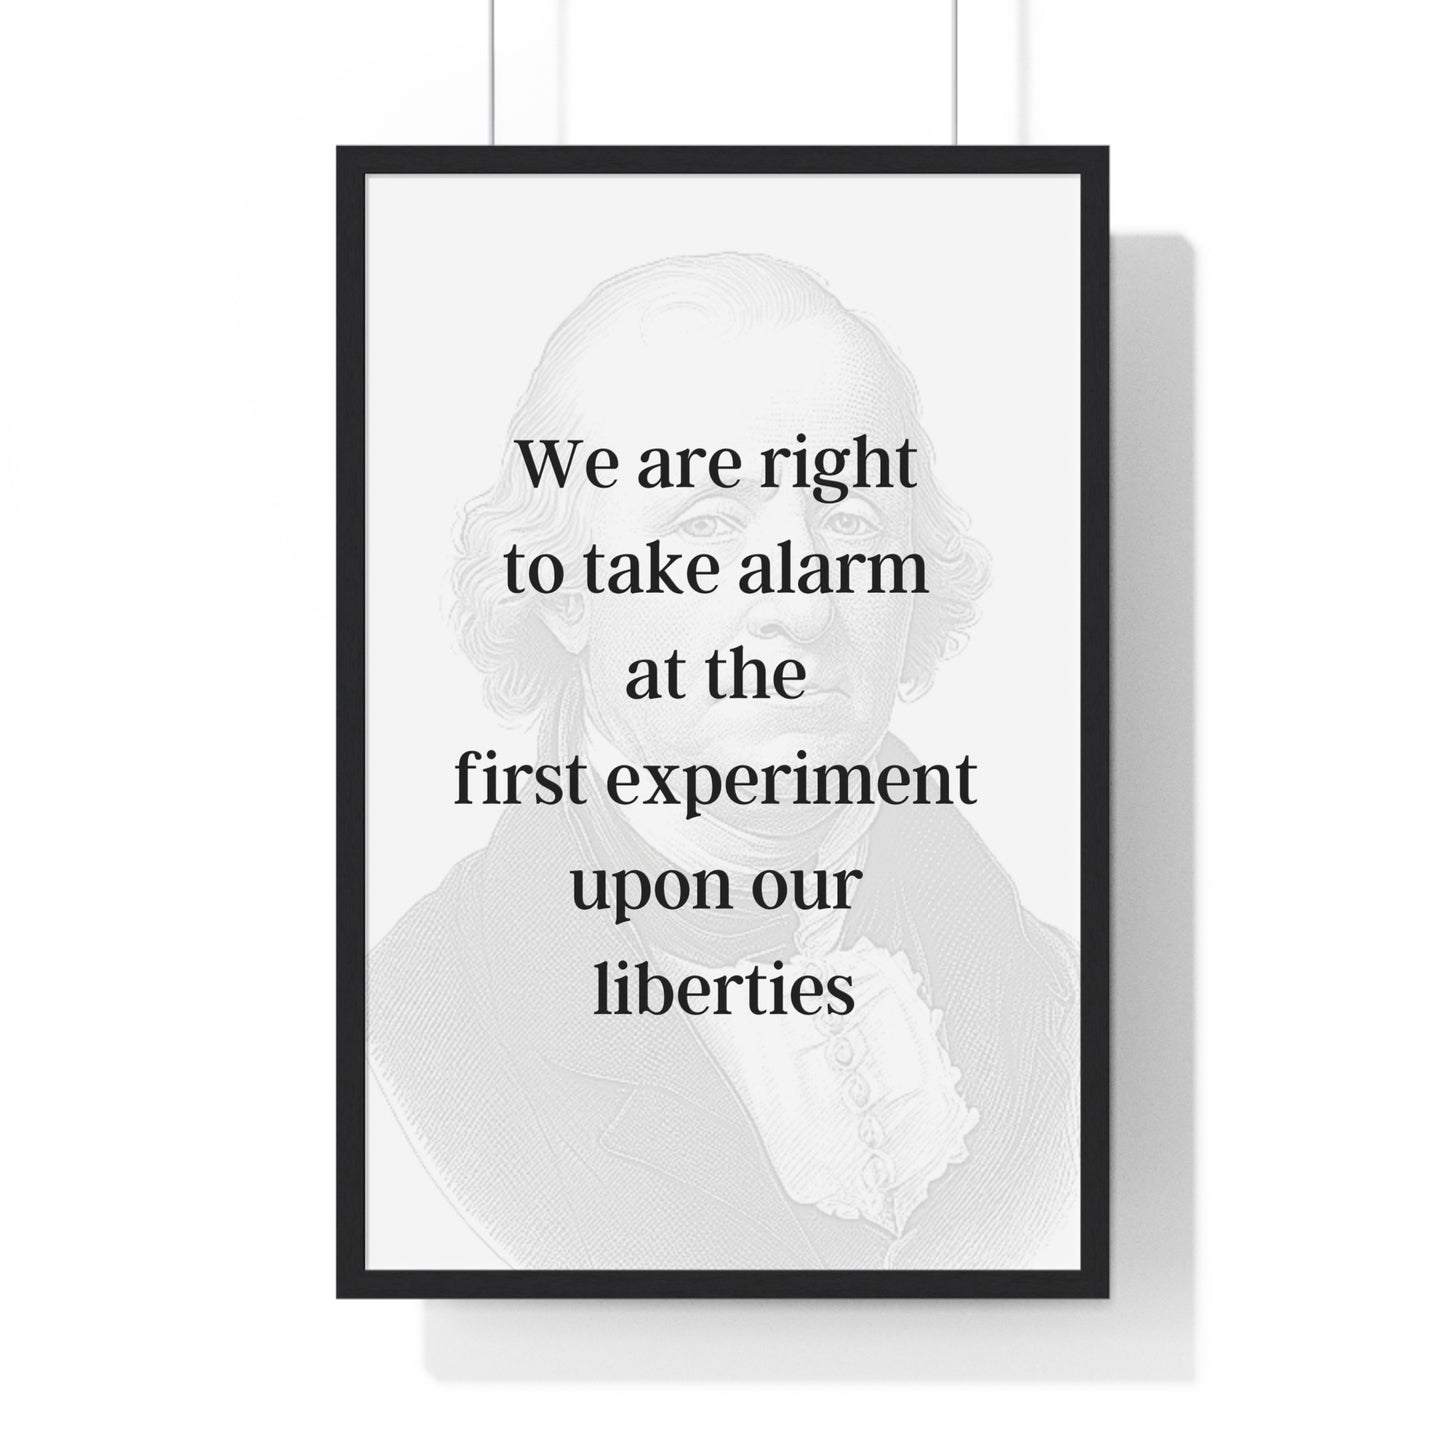 James Madison Quote 4, Poster Art, Light Print, 4th President of the United States, American Patriots, AI Art, Political Art, Poster Prints, Presidential Portraits, Presidential Quotes, Inspirational Quotes